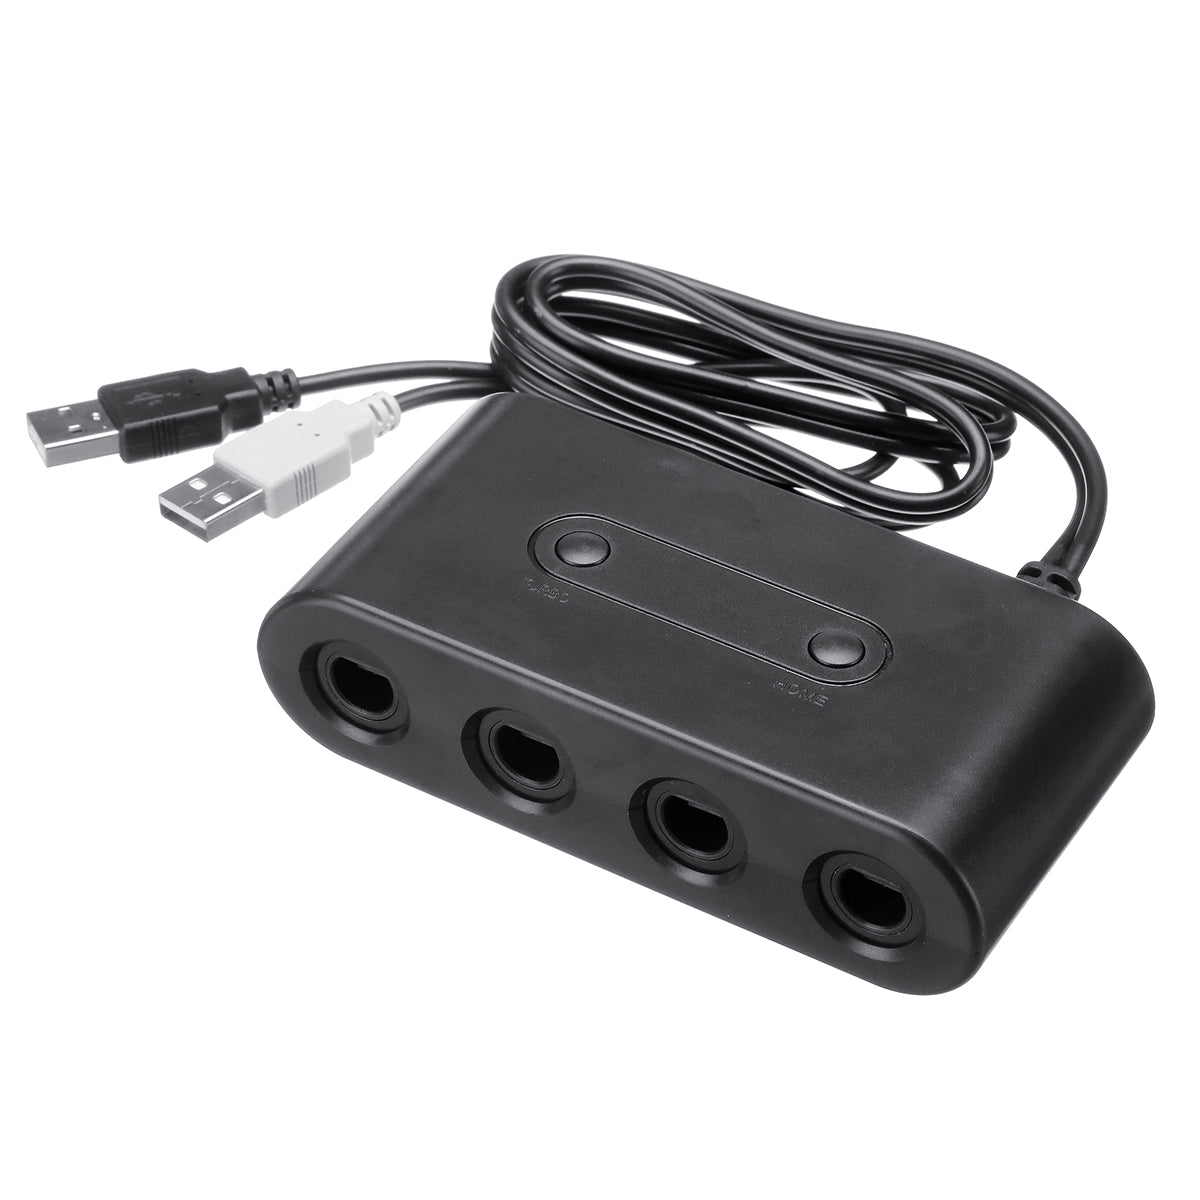 4 Port Gamecube NGC USB Converter Game Controller Adapter For Nintendo Switch Gamepad Wii U PC 